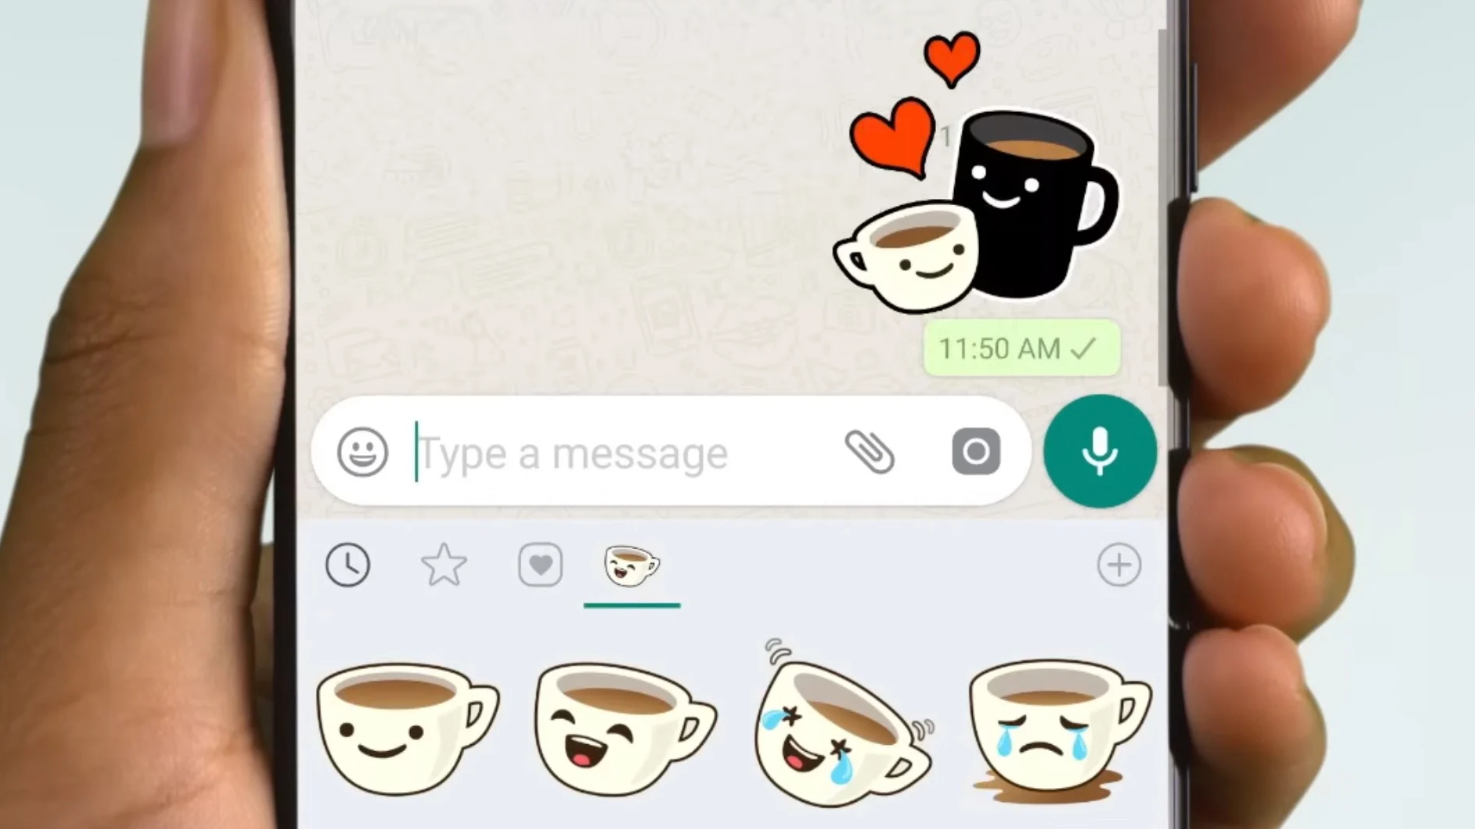 WhatsApp is said to introduce Lottie framework support on Android and iOS